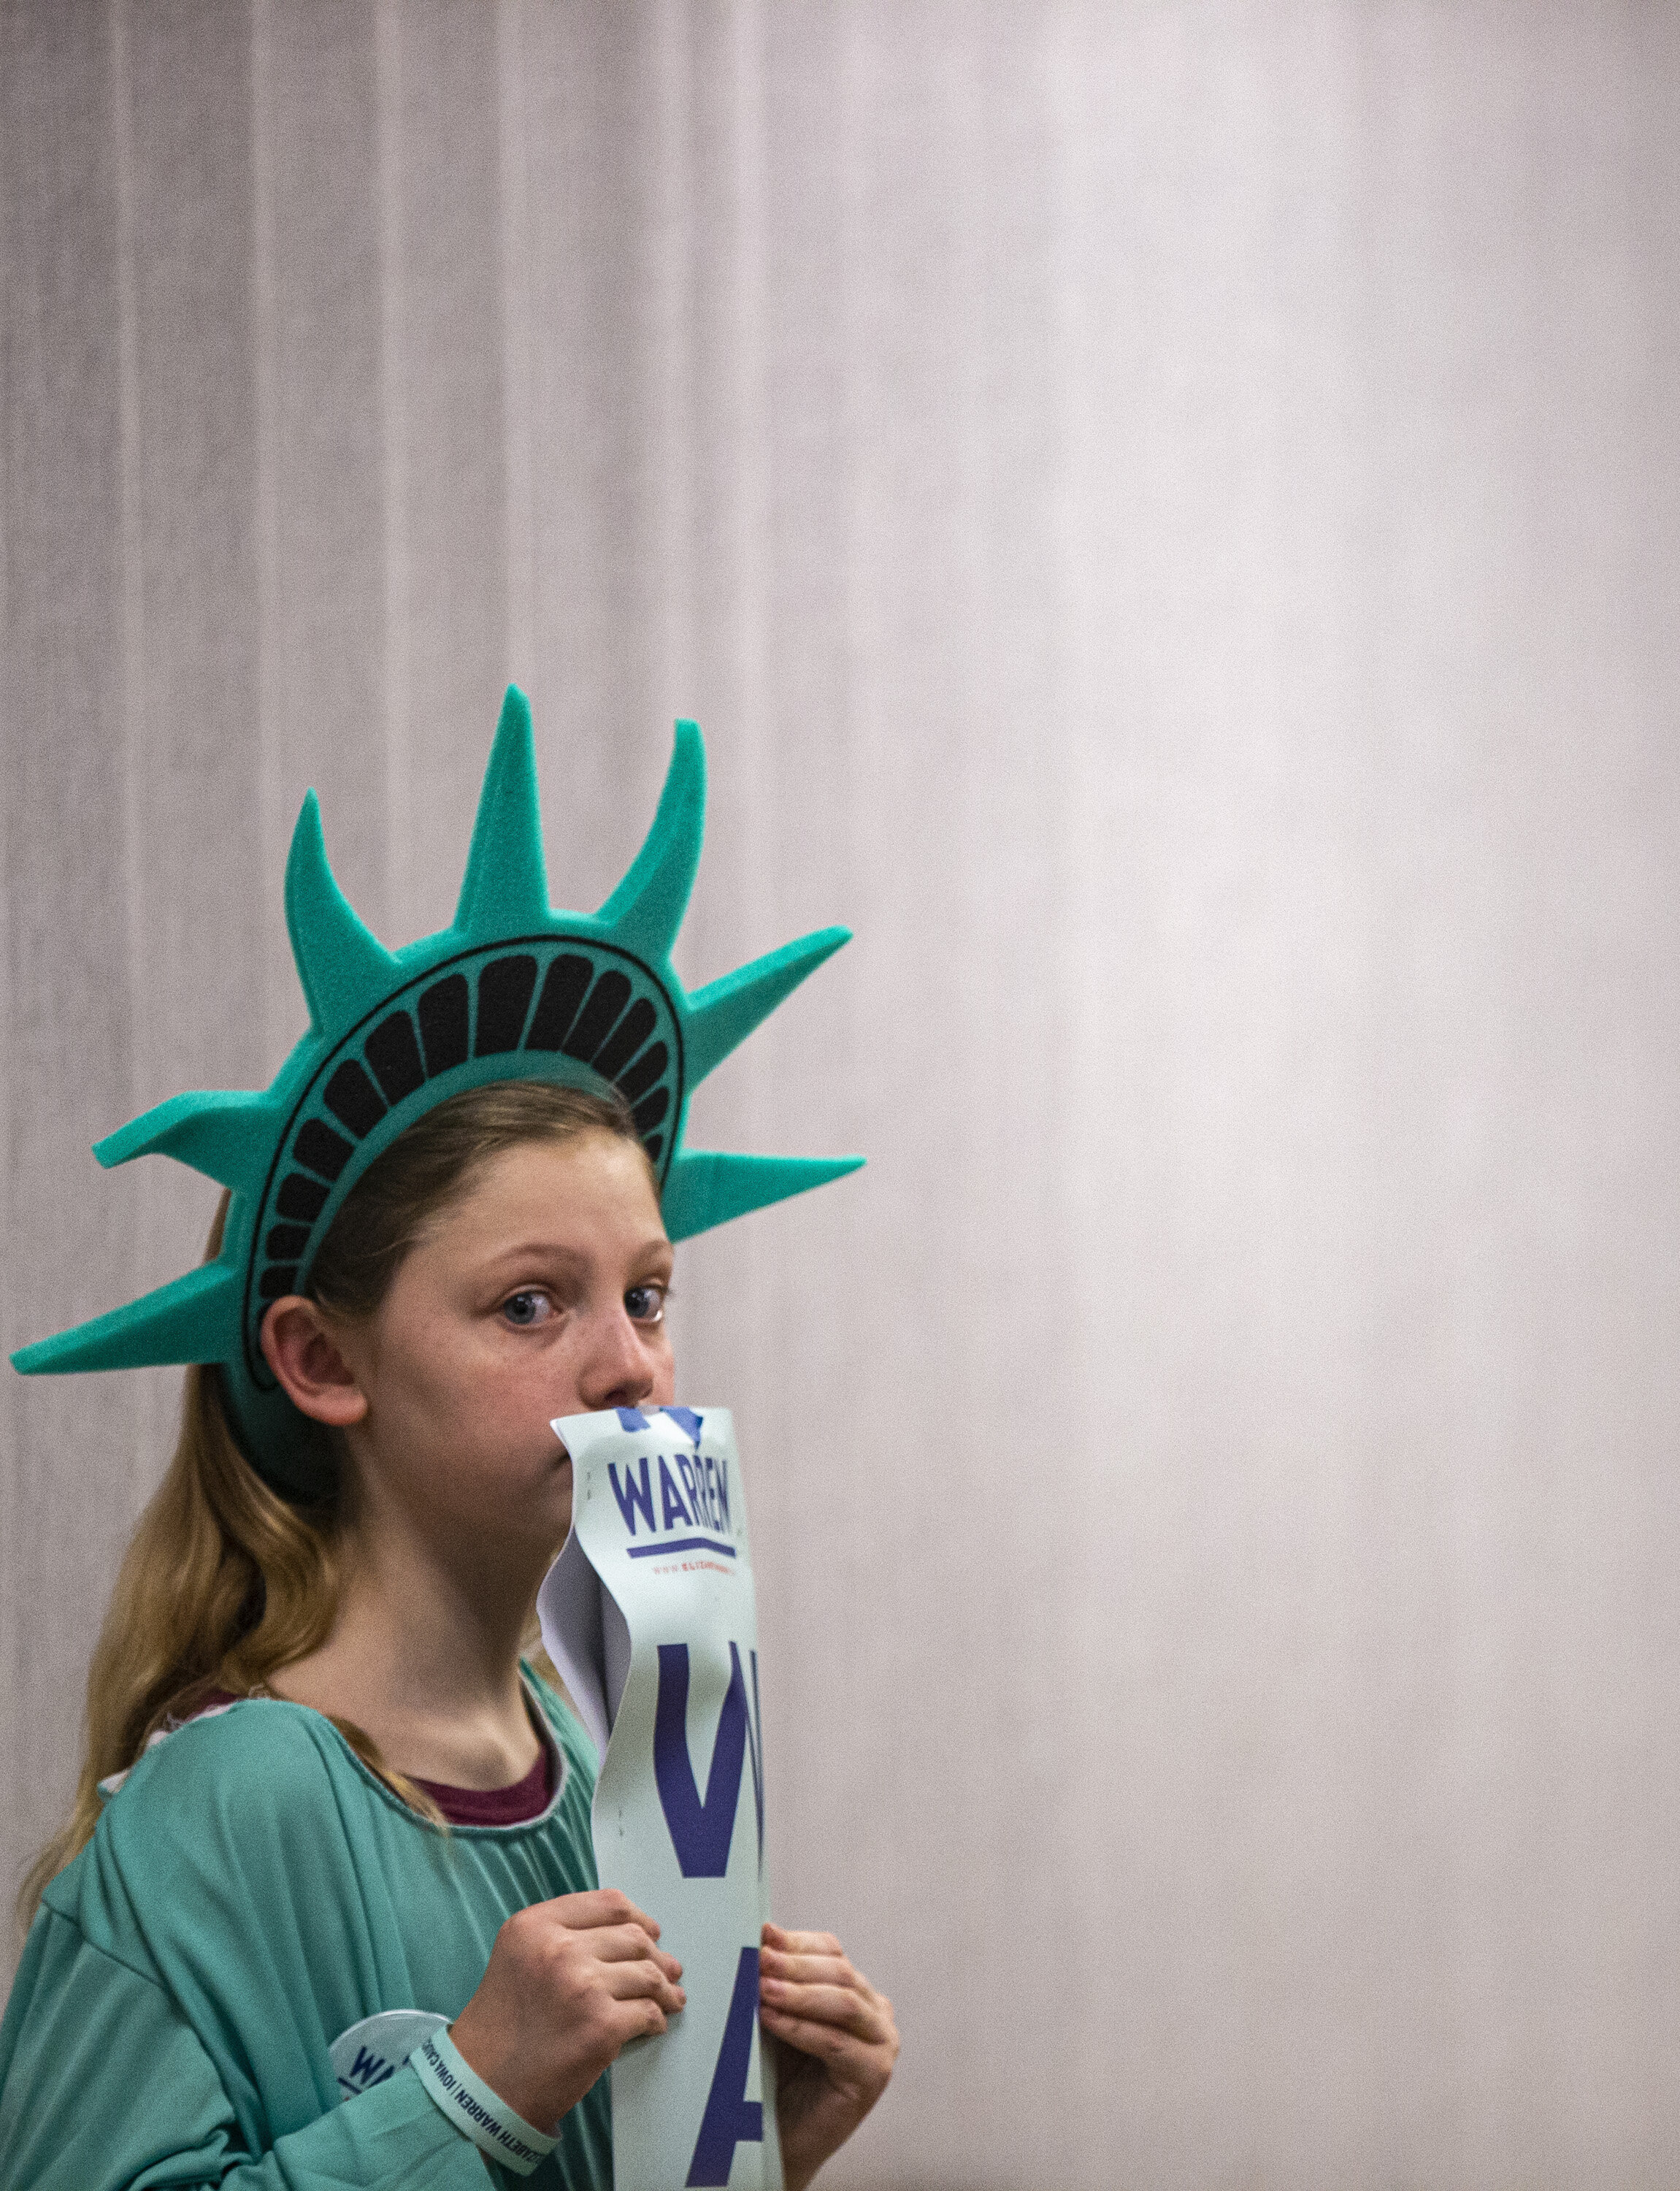  Saoirse Hermann-Wickham, 9, of West Liberty holds a sign in support of Democratic presidential candidate Sen. Elizabeth Warren while dressed as Lady Liberty at the precinct two caucus site at the community center in West Liberty, Iowa, Monday. 